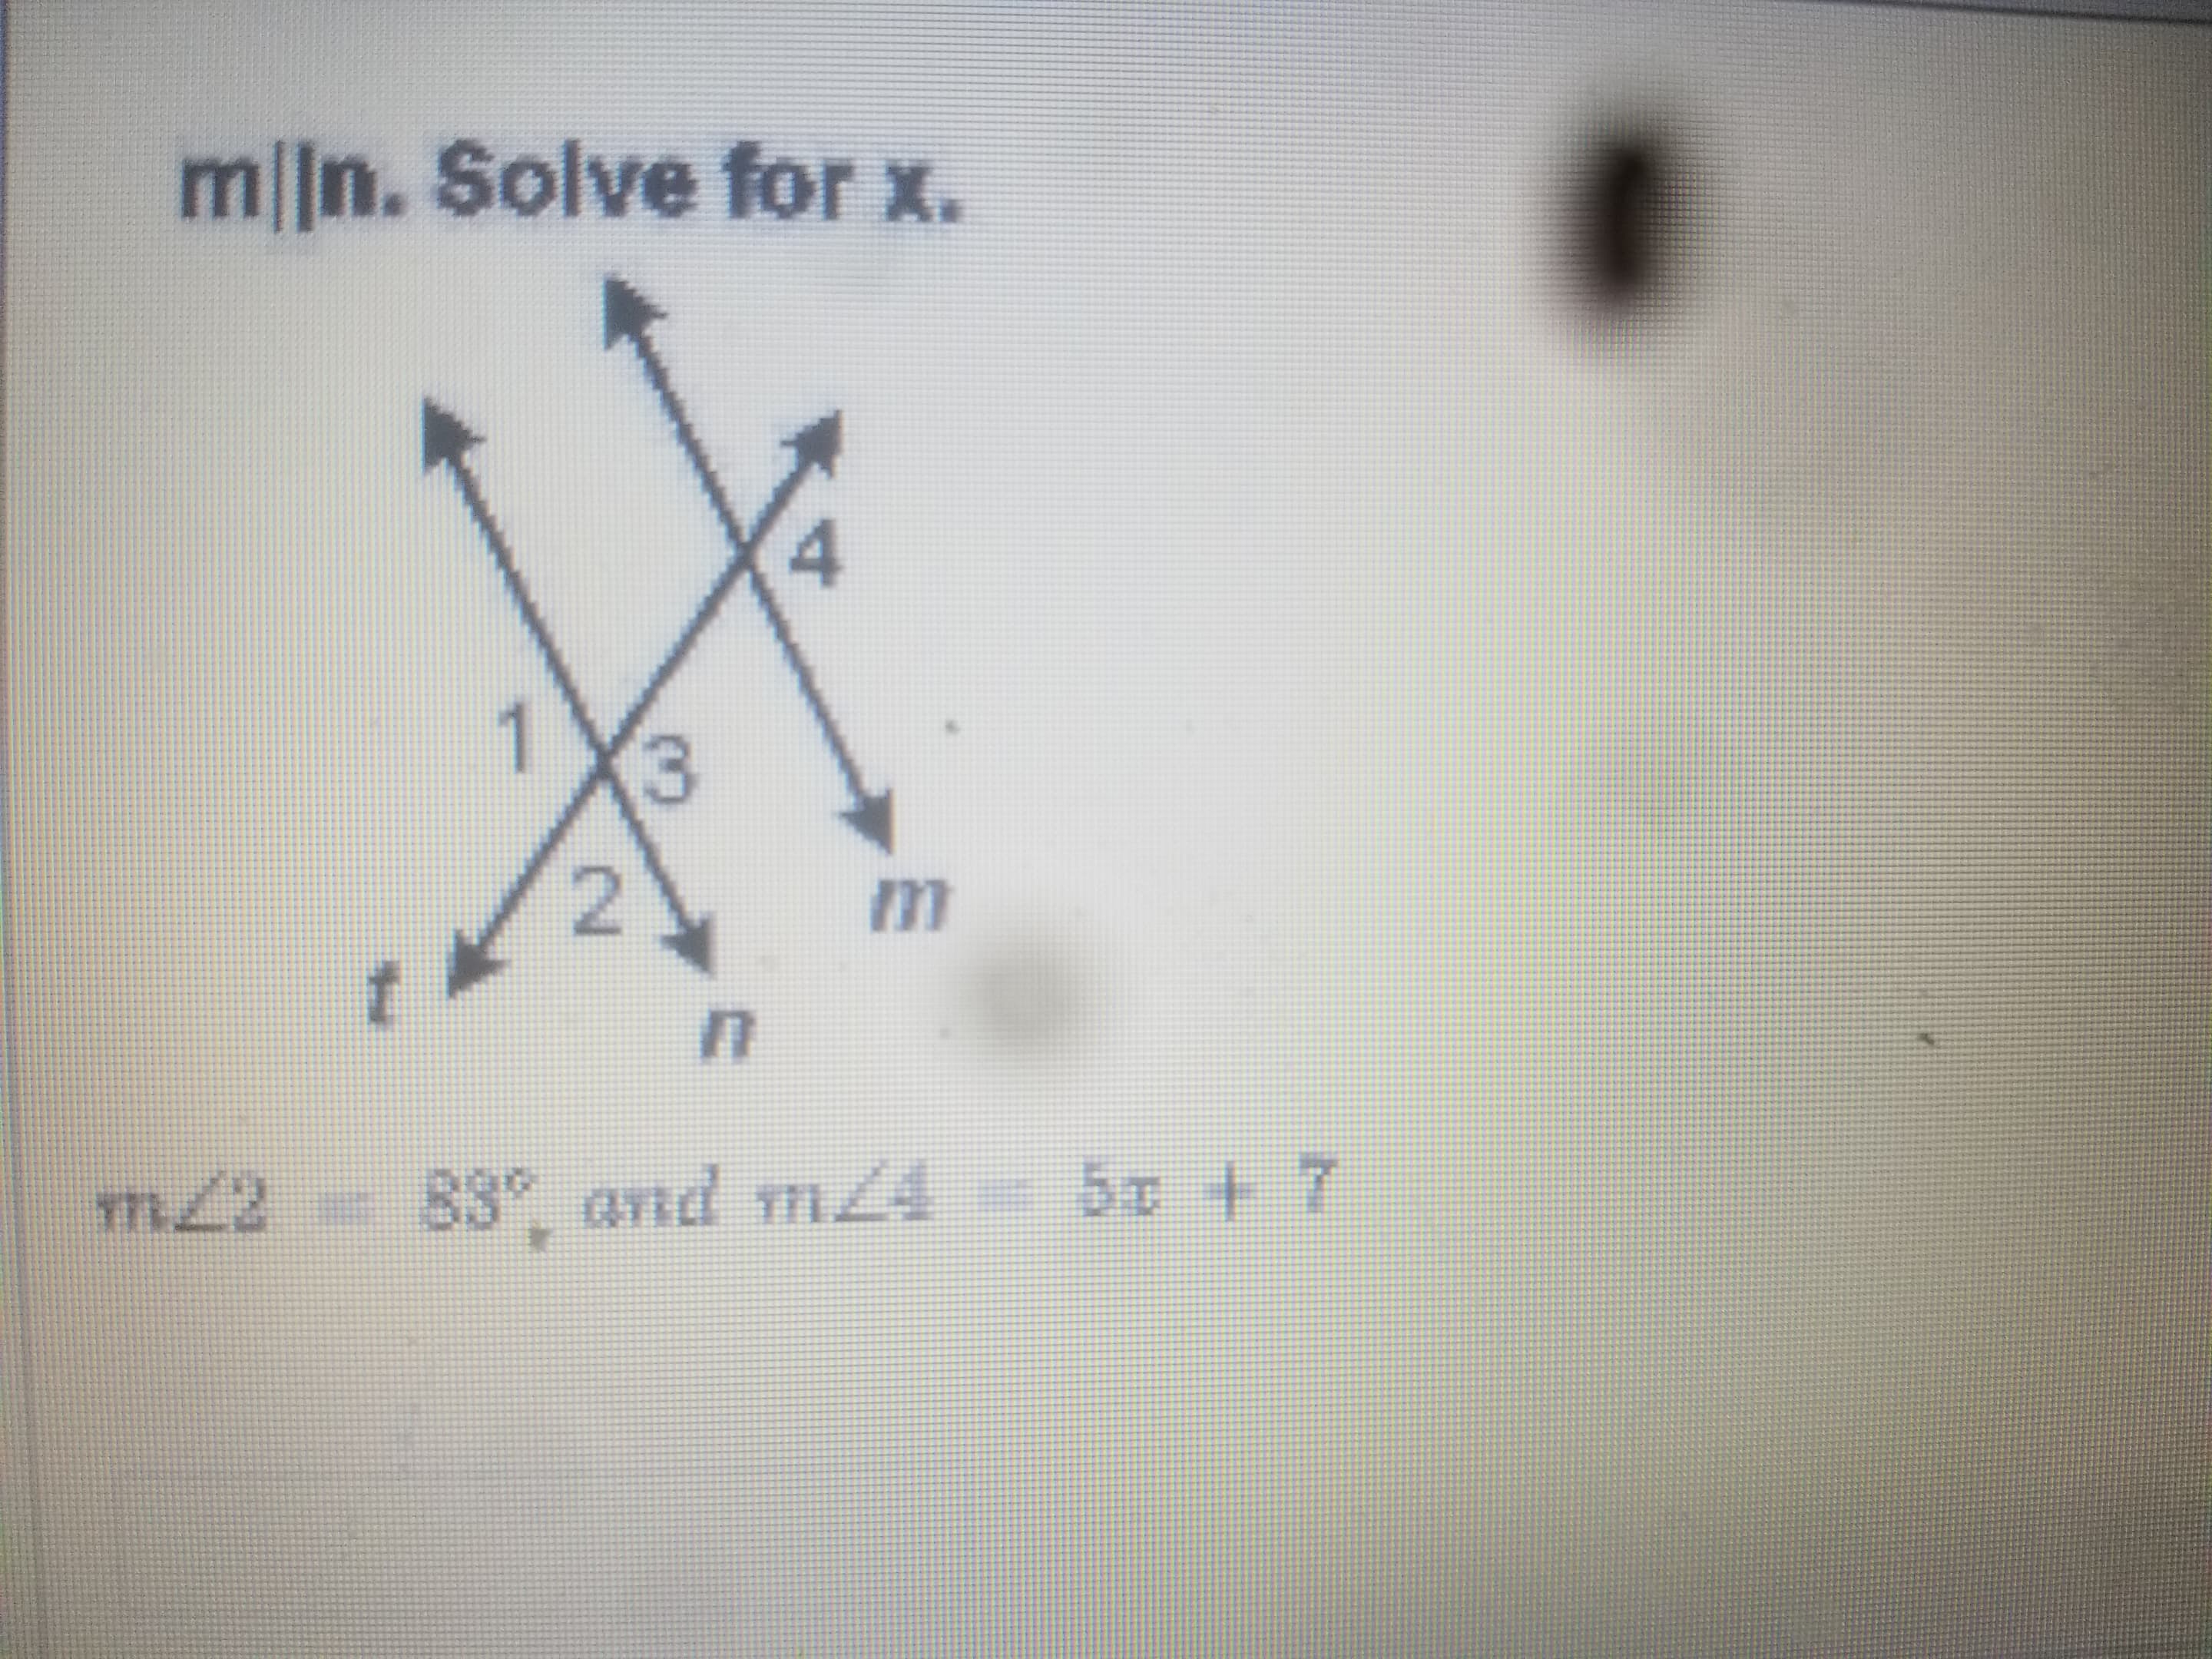 m||n. Solve for x.
4.
1
3.
